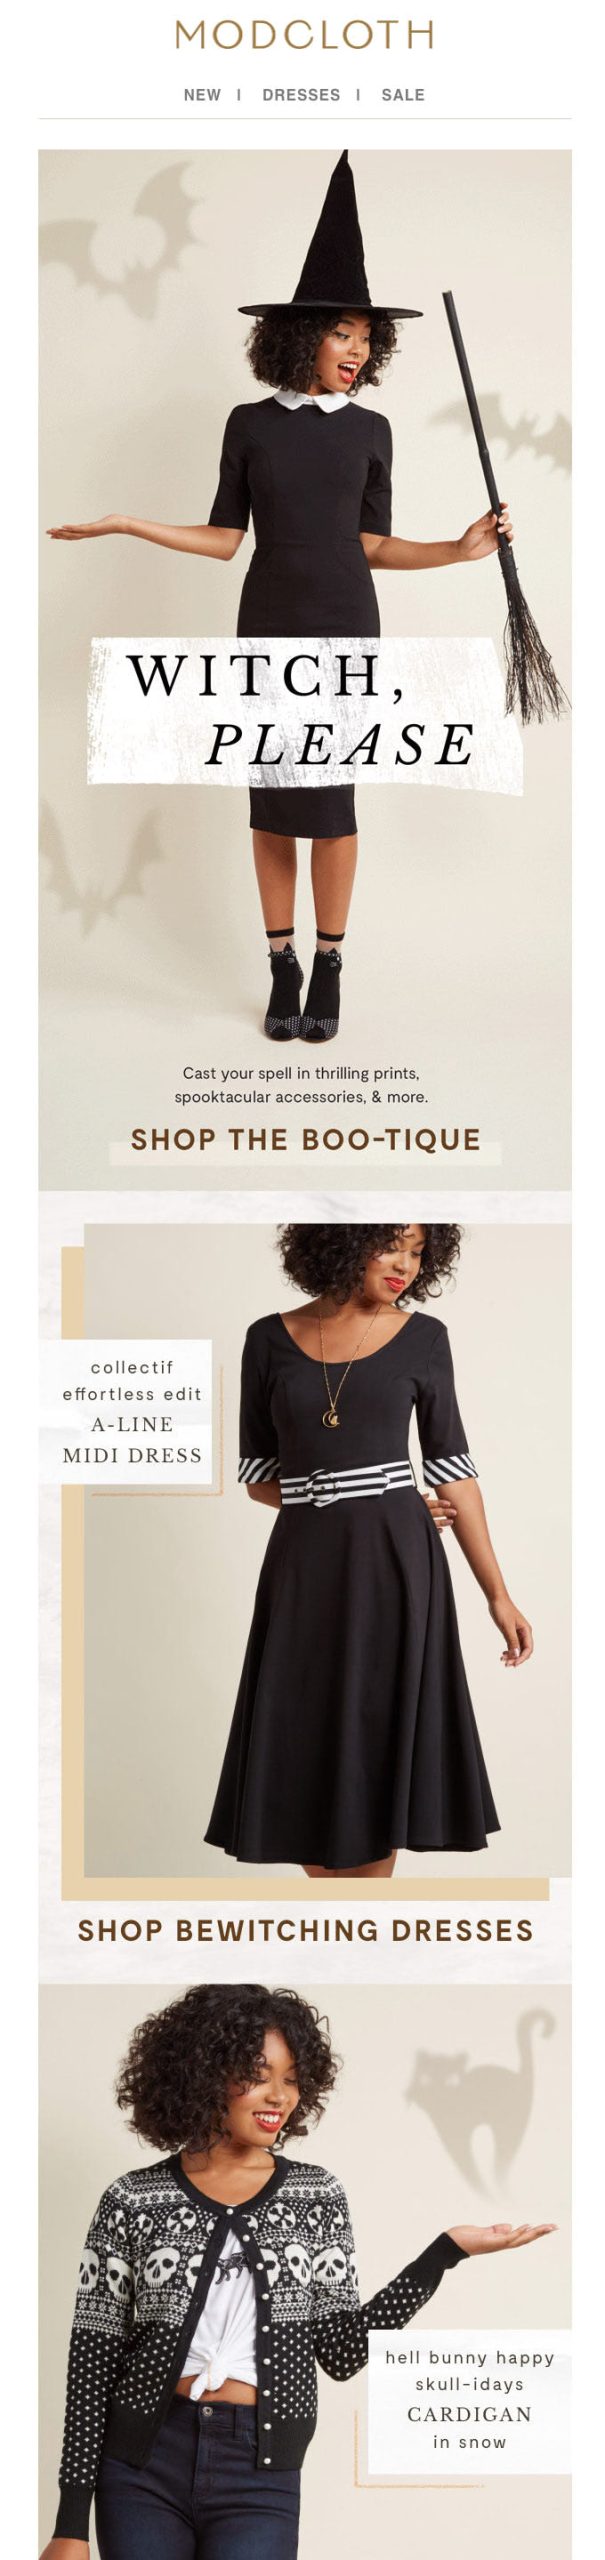 Halloween email ModCloth